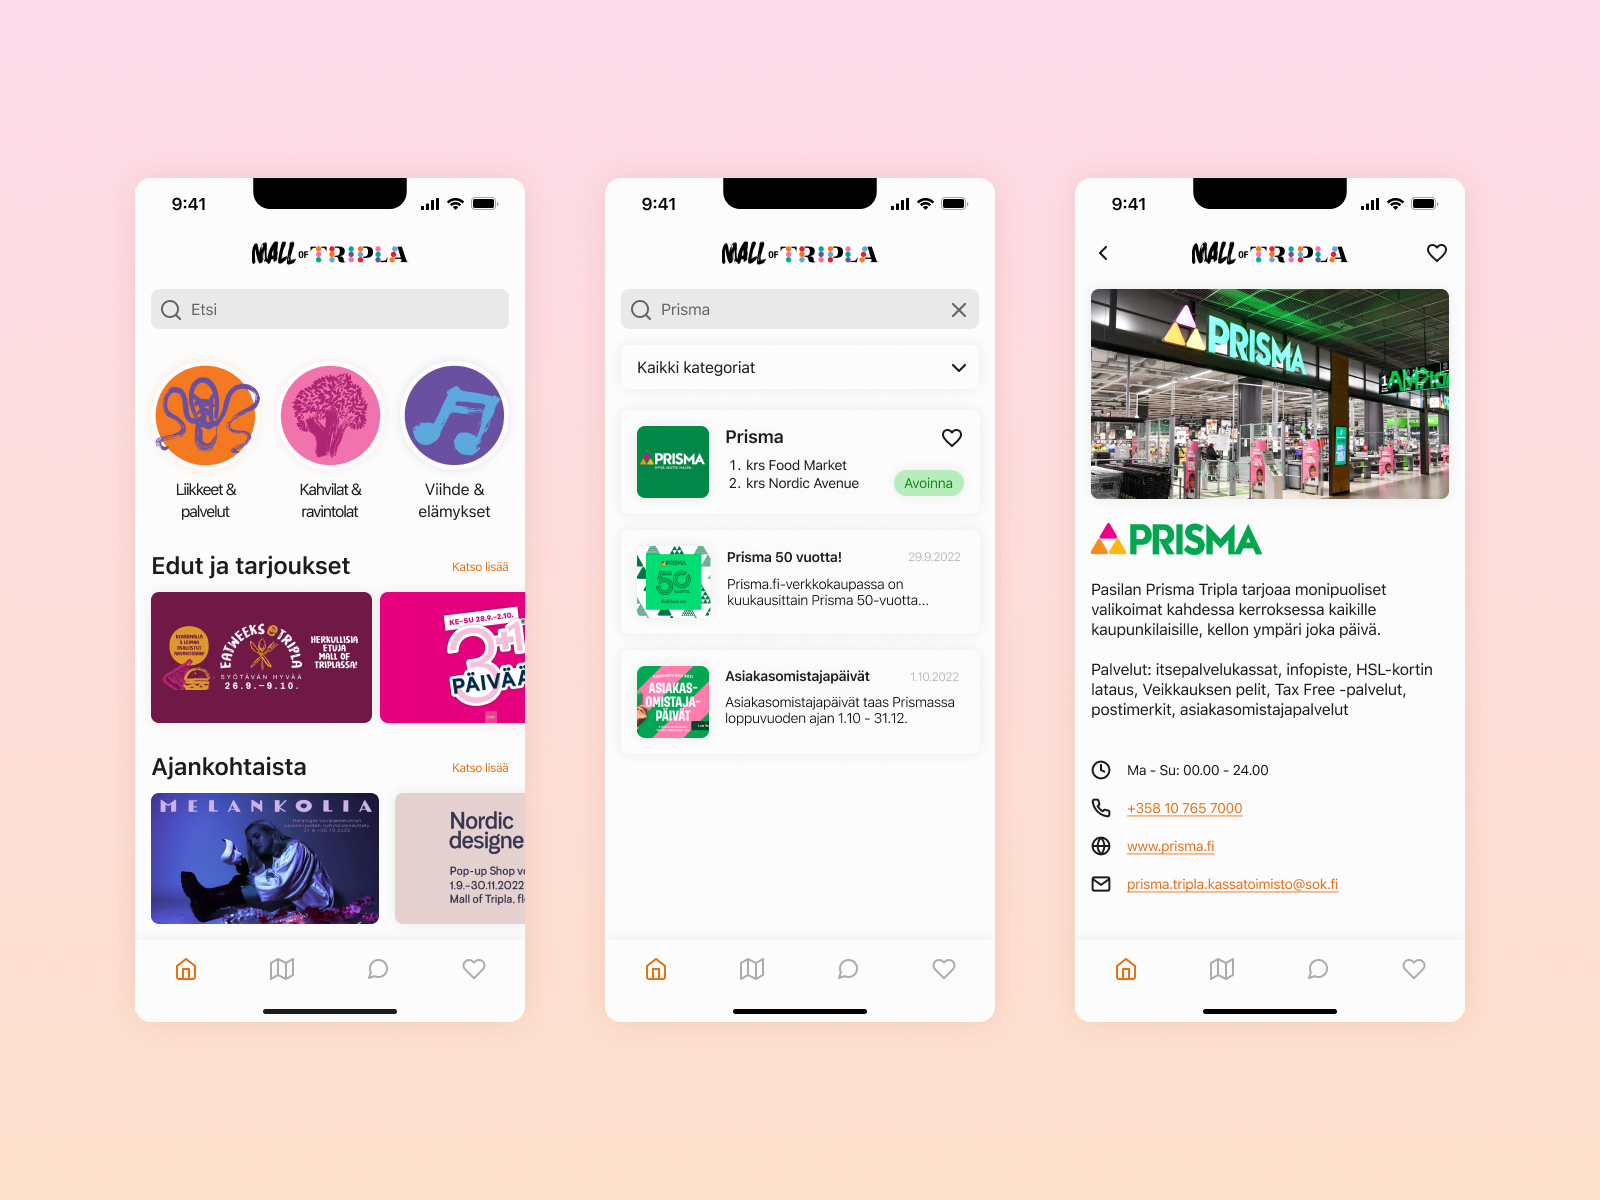 Mall of Tripla Redesign by Panu Niemi on Dribbble